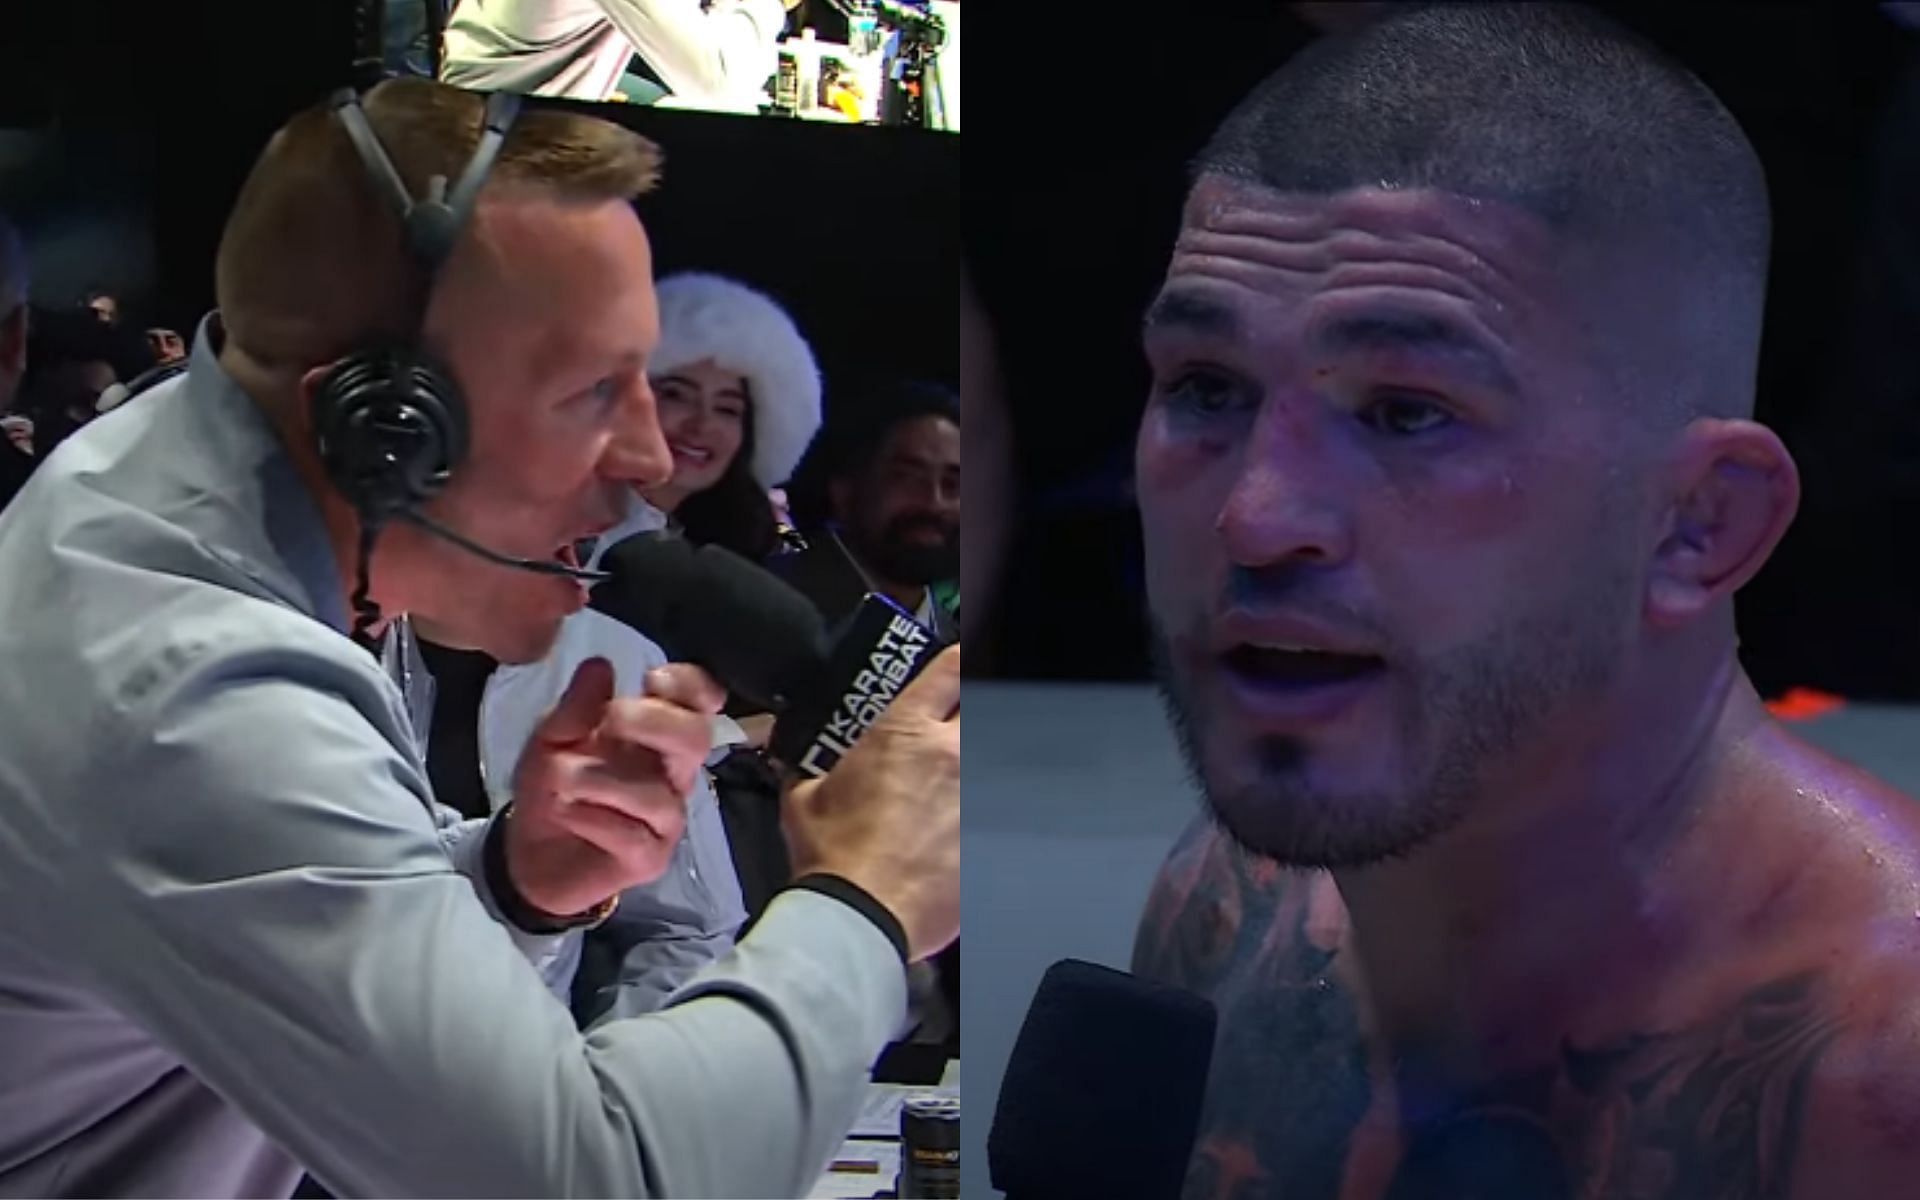 Georges St-Pierre [Left] responded after Anthony Pettis [Right] called him out following his KC 43 win [Image courtesy: Karate Combat - YouTube]